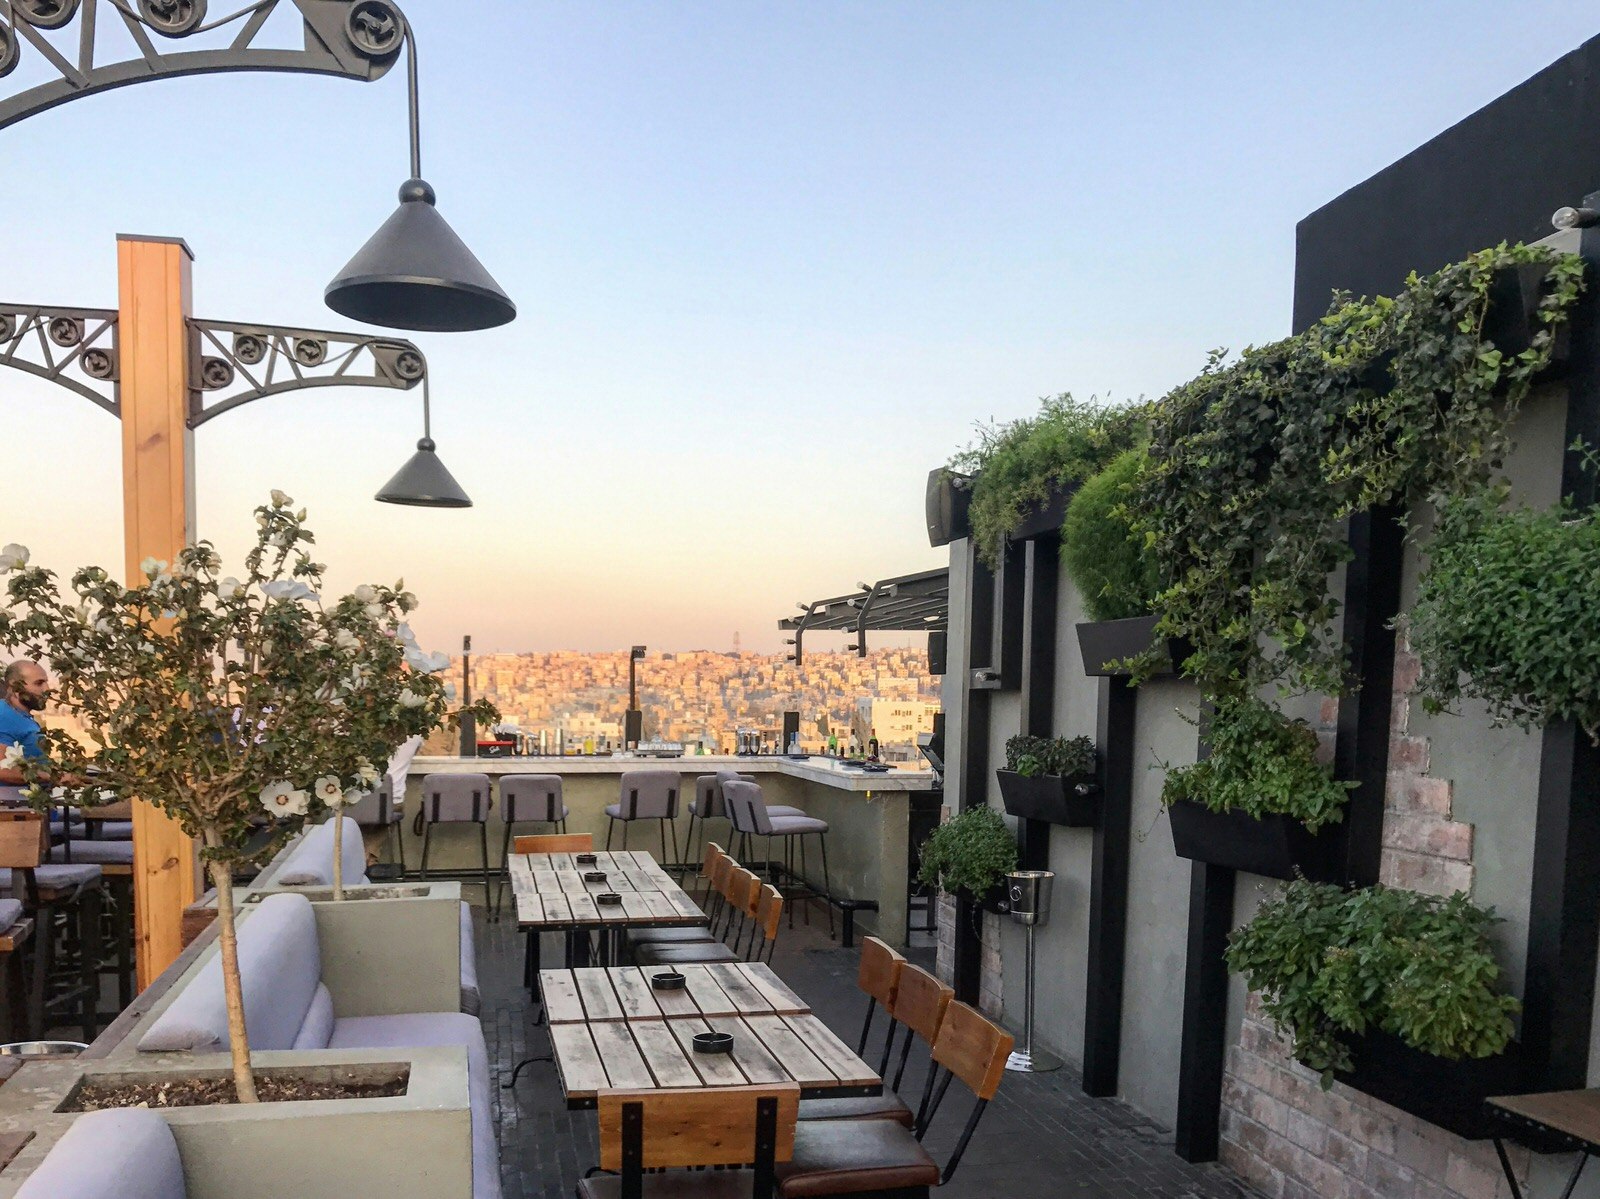 District's rooftop with a city view of Amman. Image by Sunny Fitzgerald / Lonely Planet